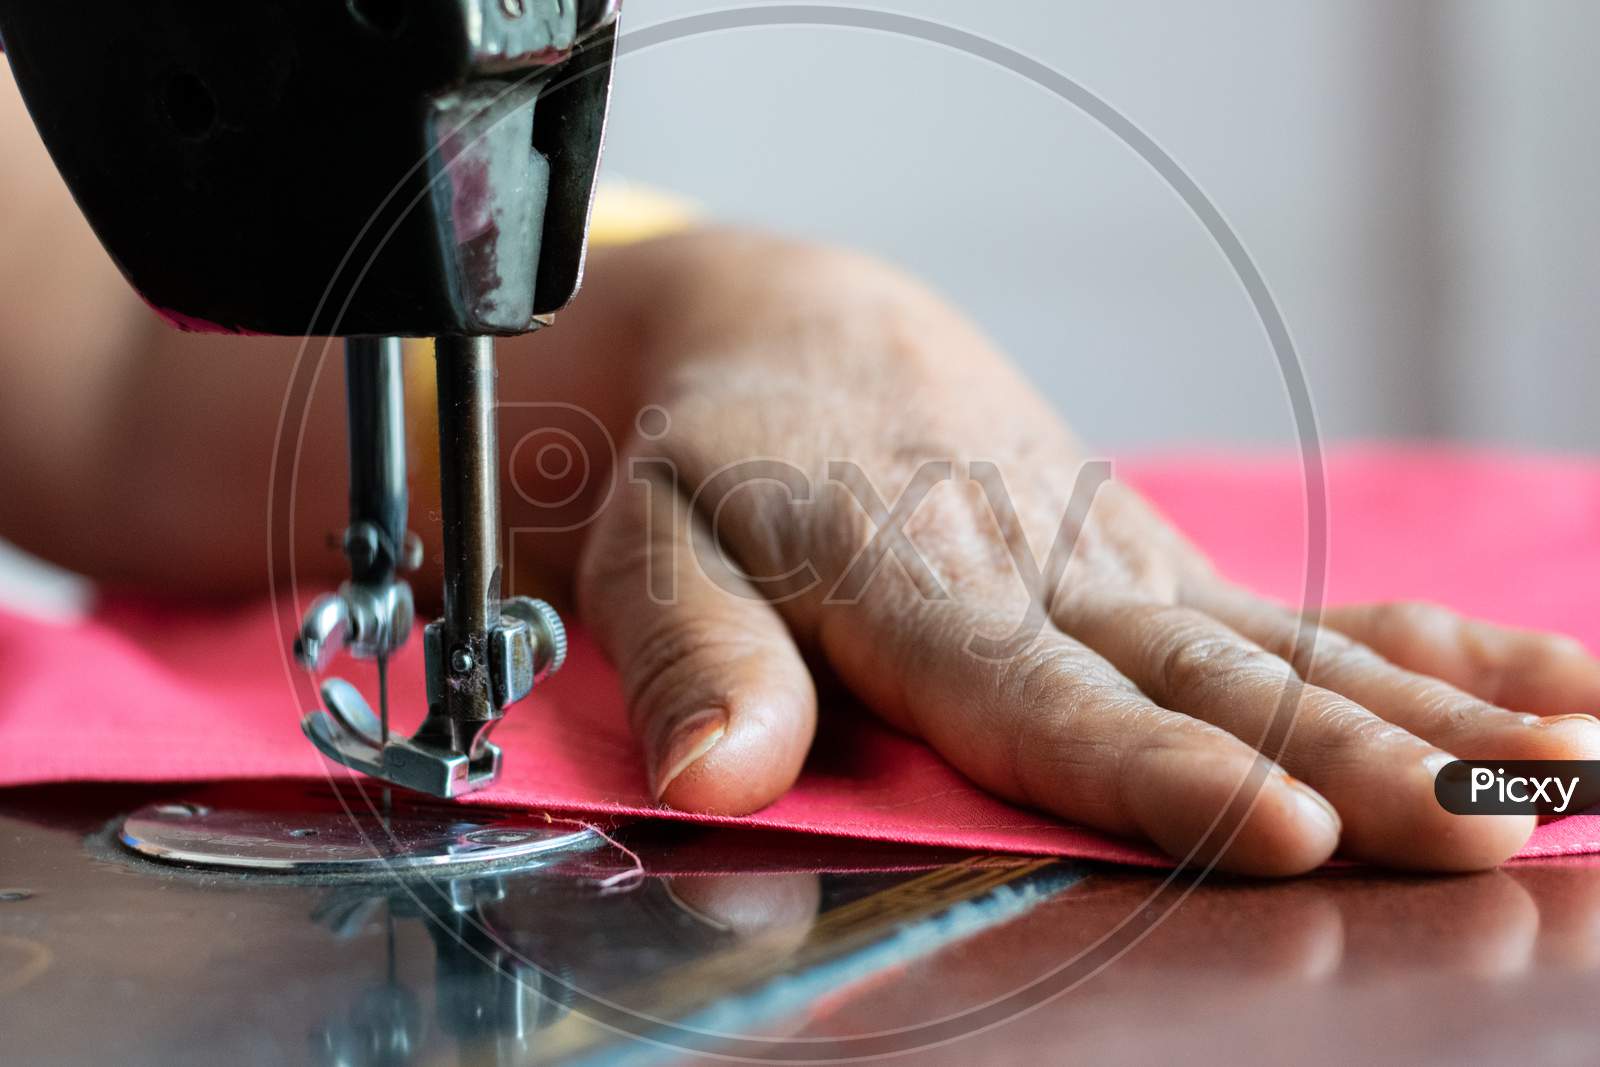 A woman sewing clothes on sewing machine at home closeup